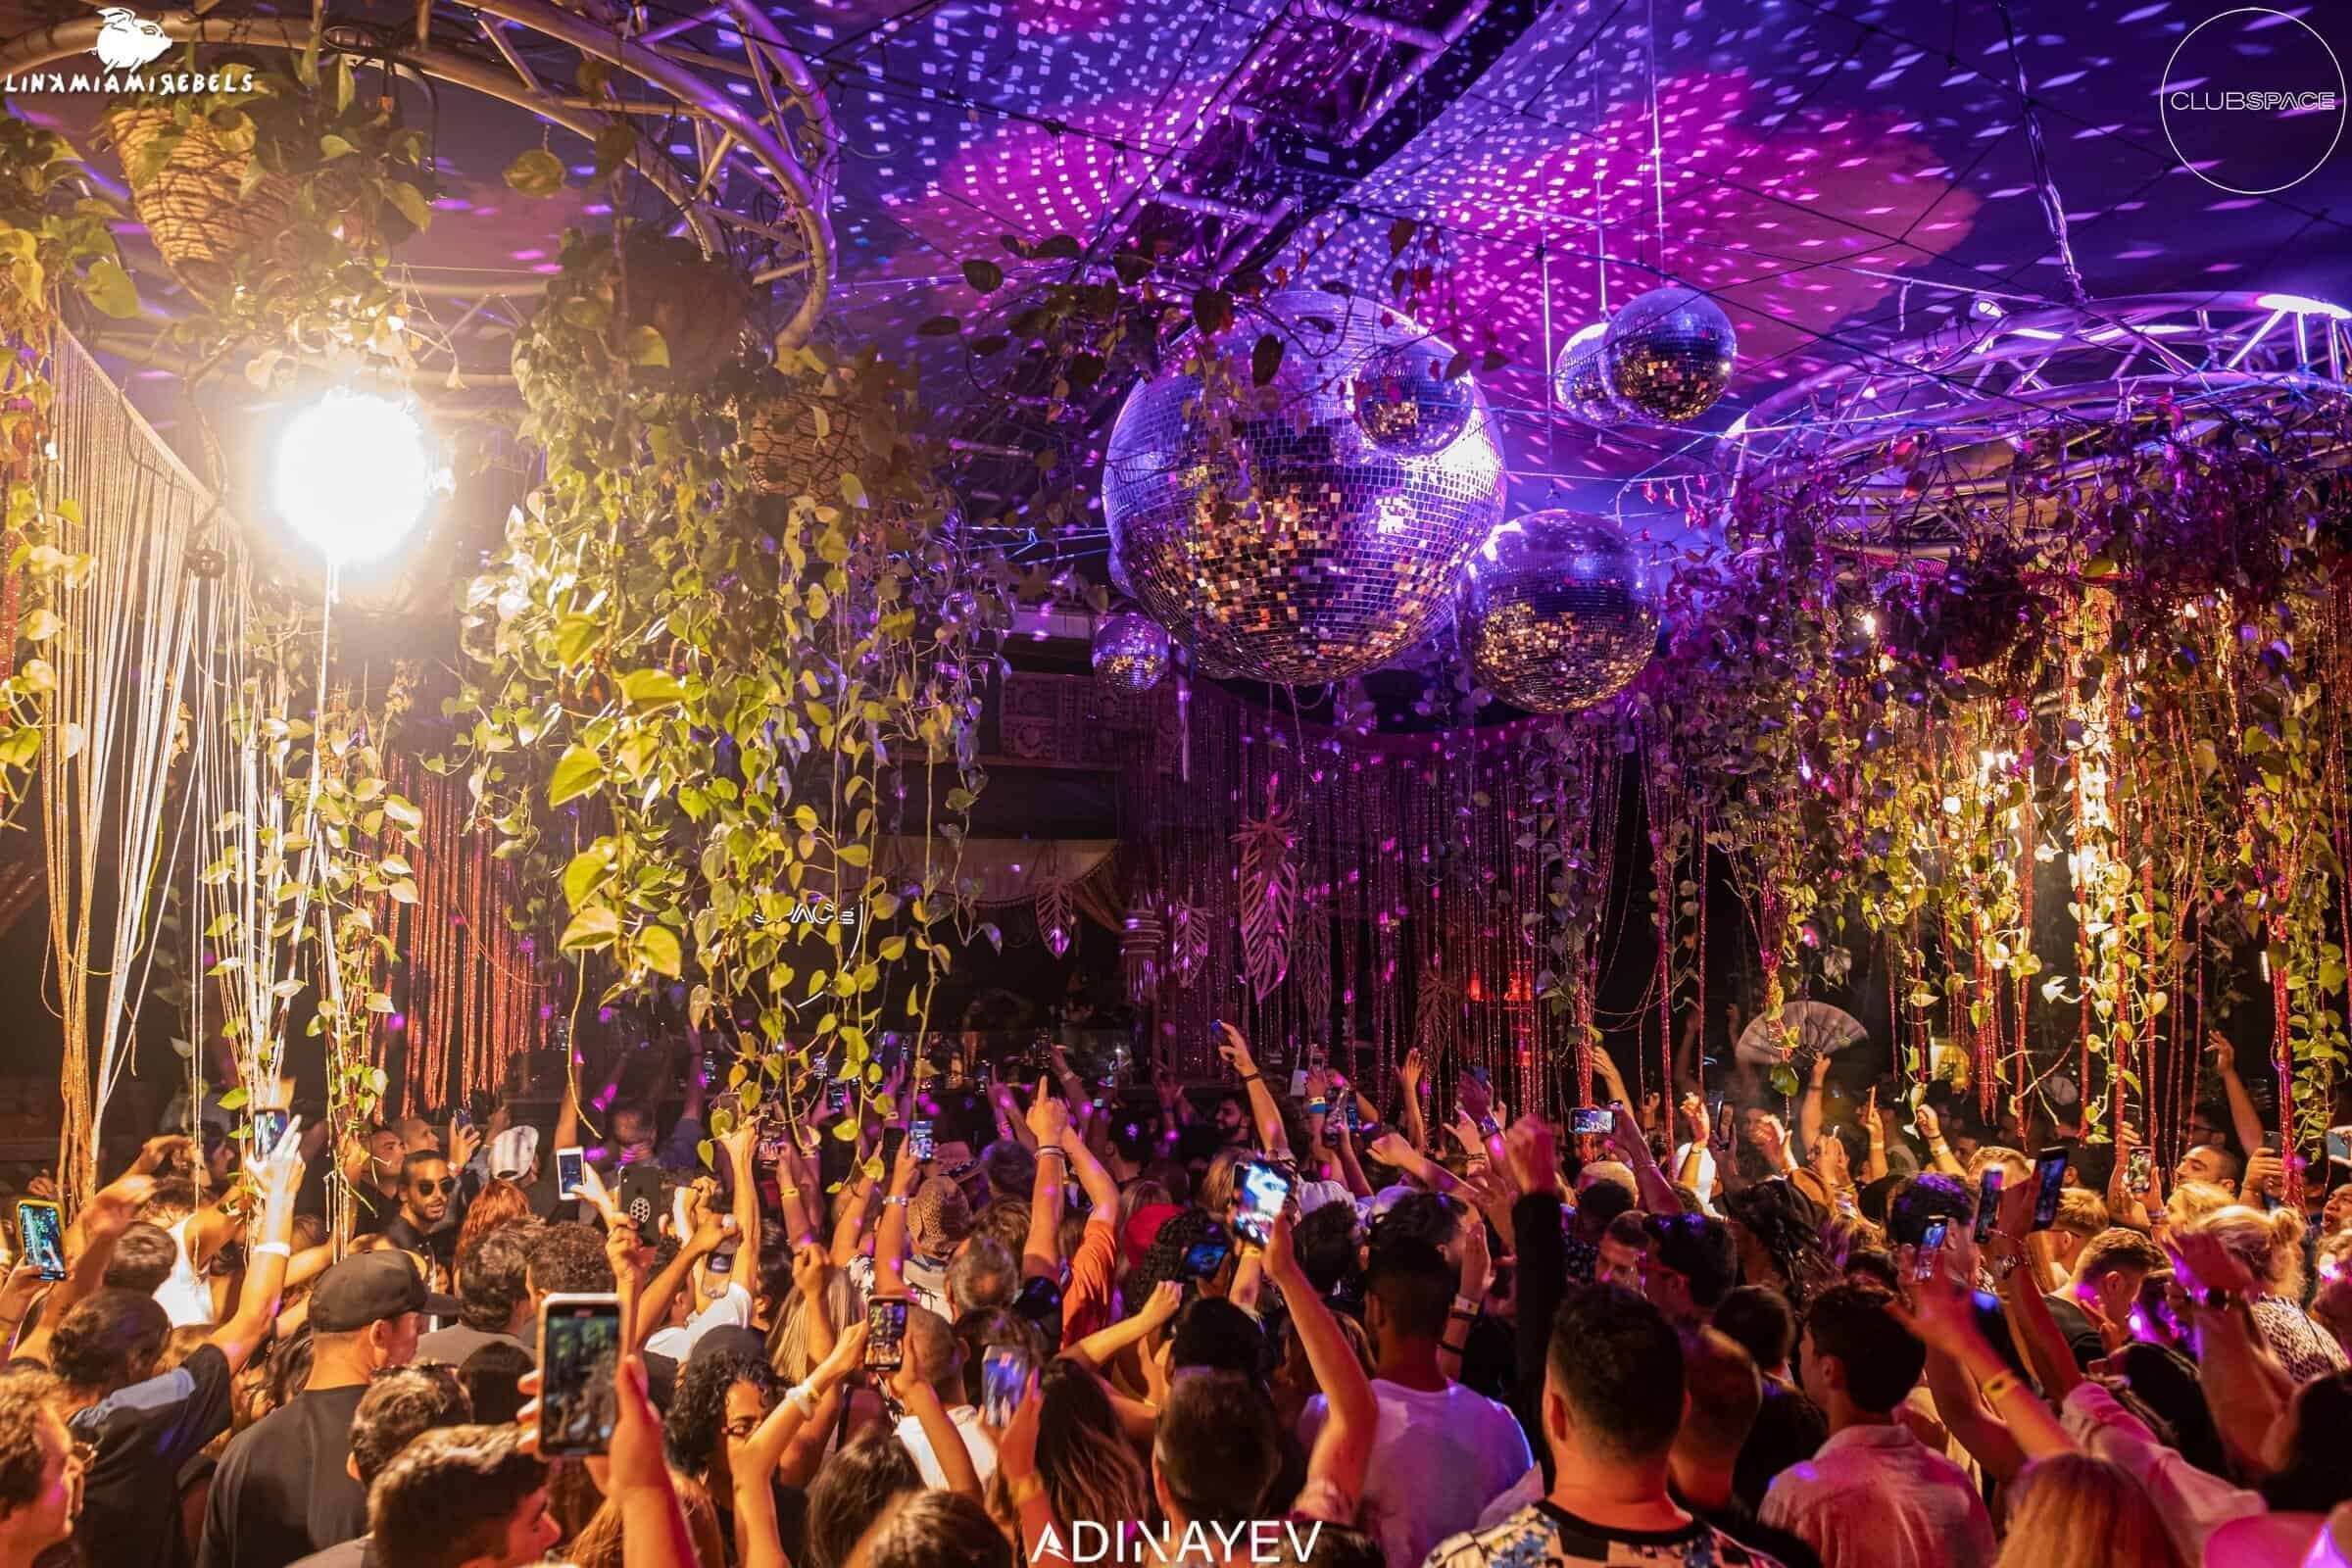 Club Space Miami reveals no phone policy for 24-hour closing party